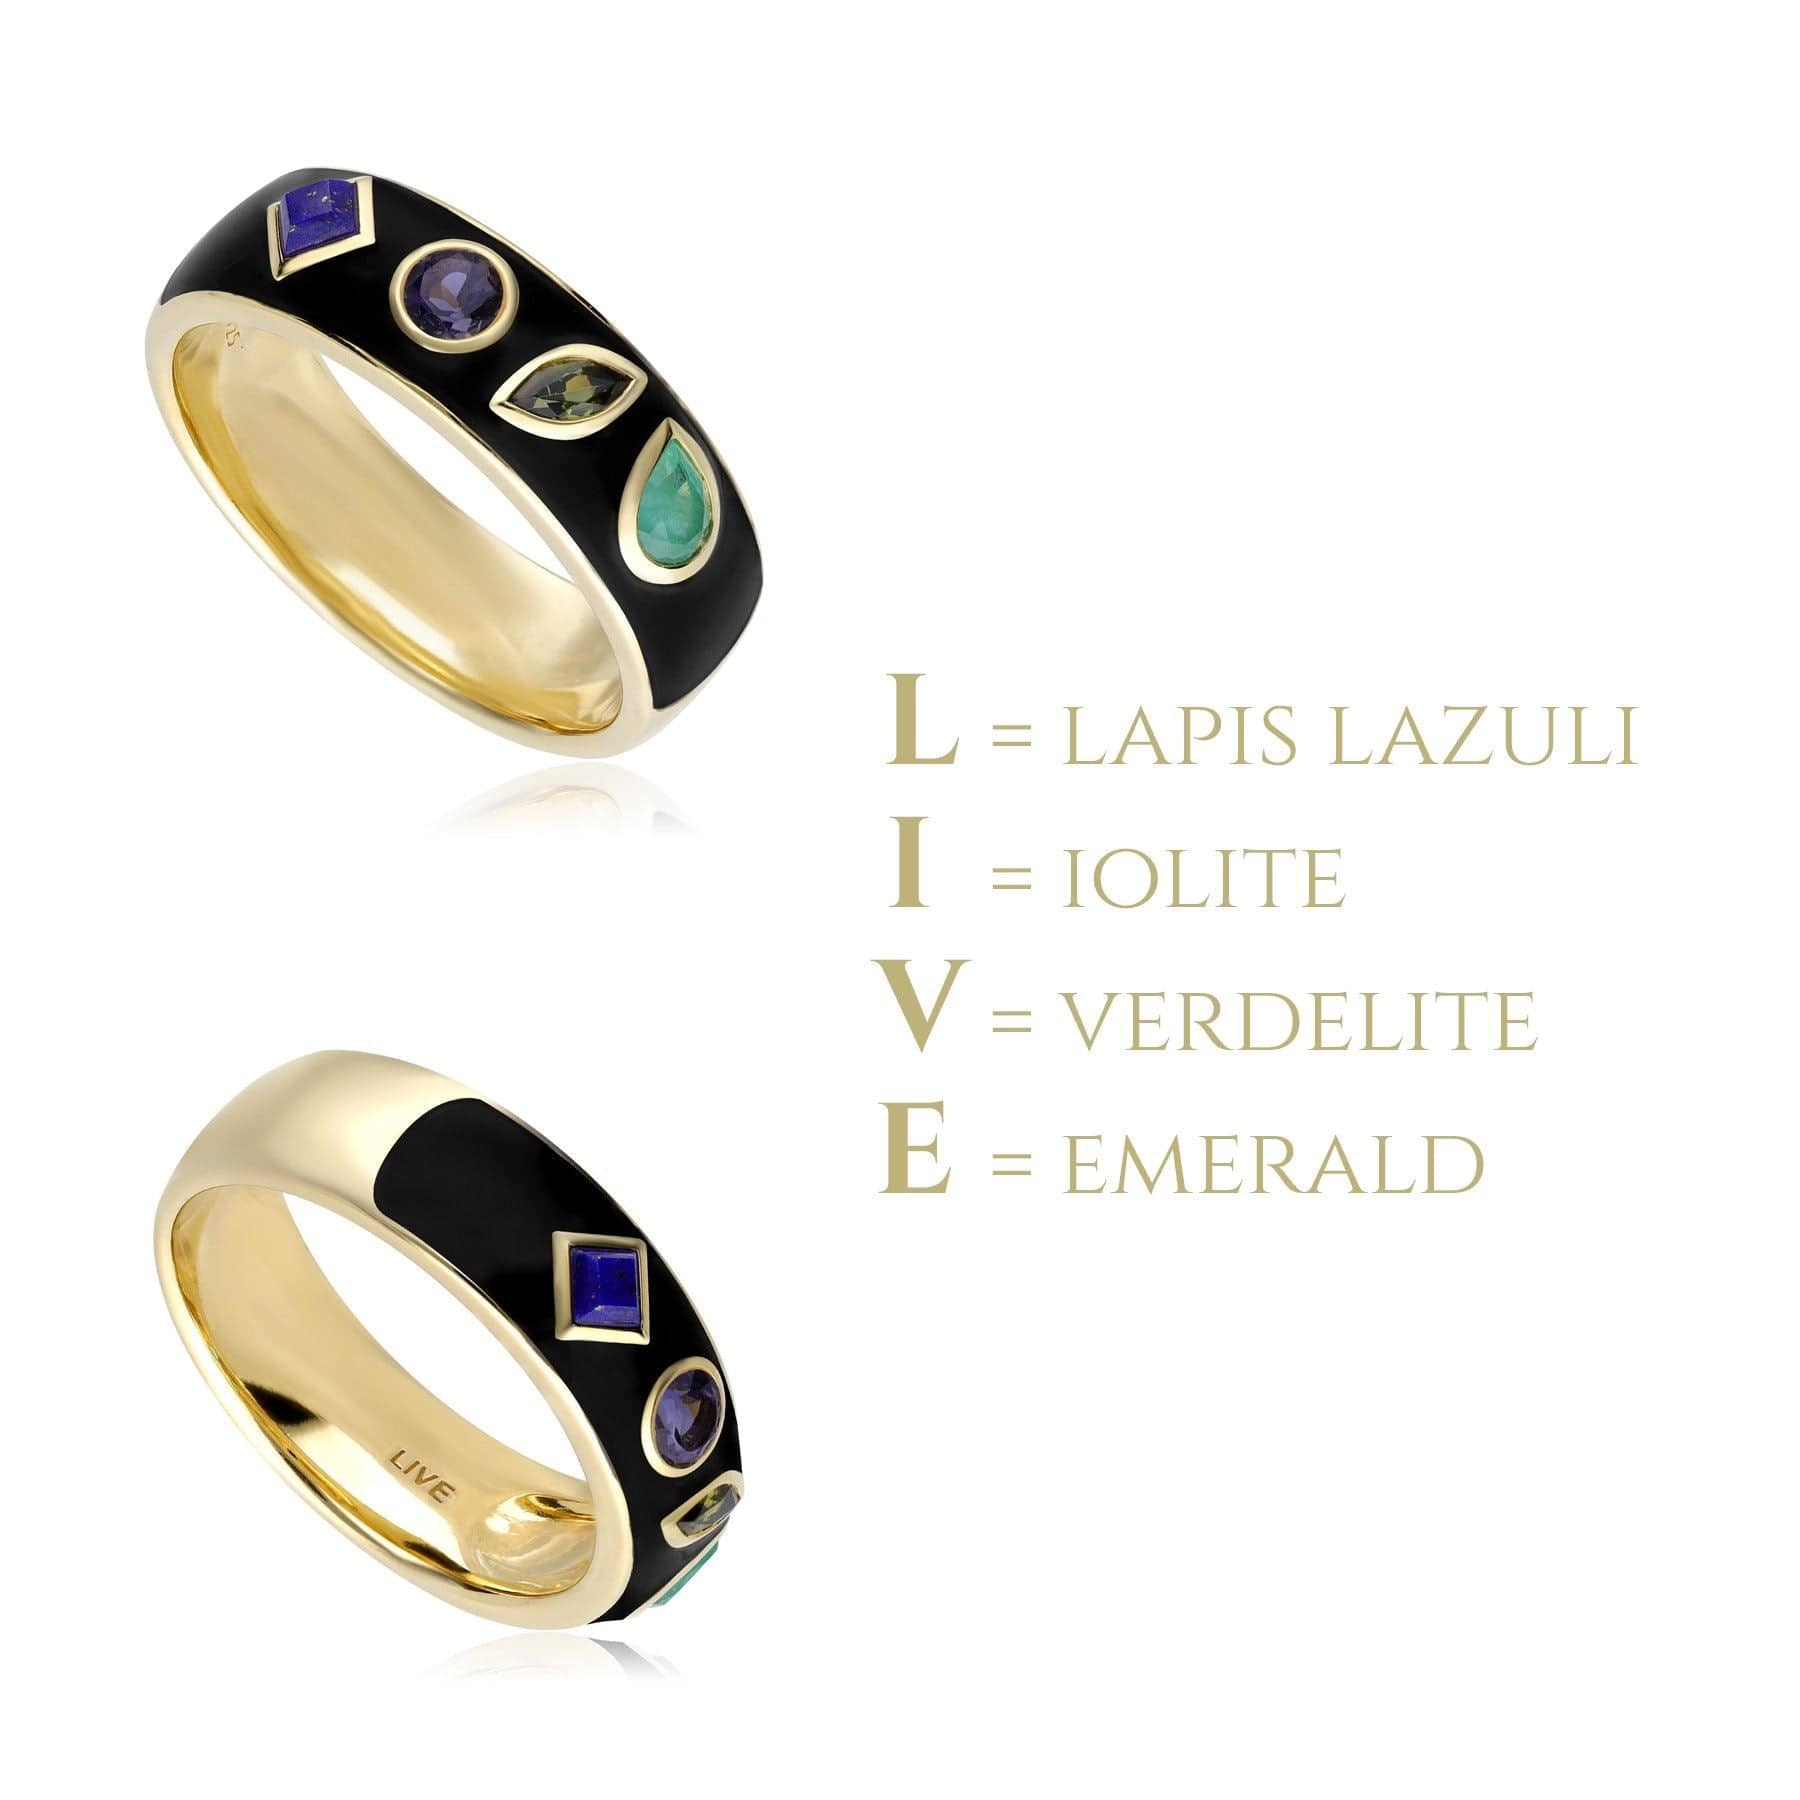 Coded Whispers Black Enamel 'Live' Acrostic Gemstone Ring In Yellow Gold Plated Silver - Gemondo